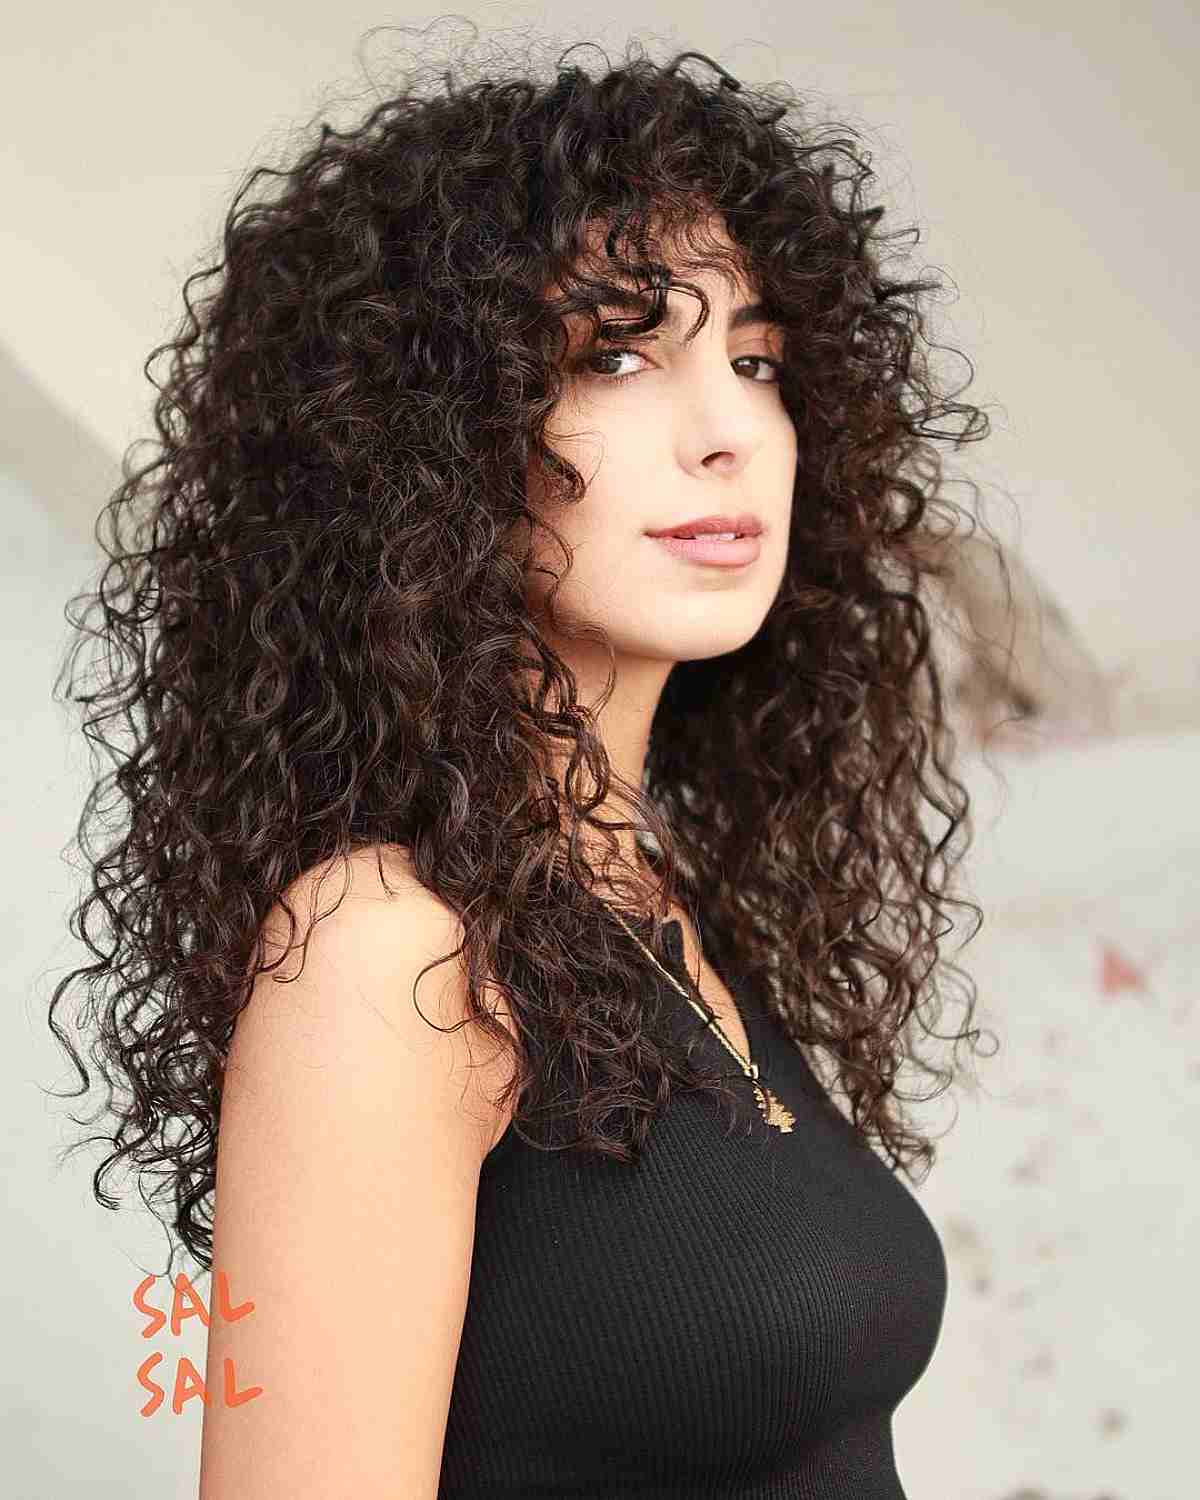 Wild Long Curls with Fringe